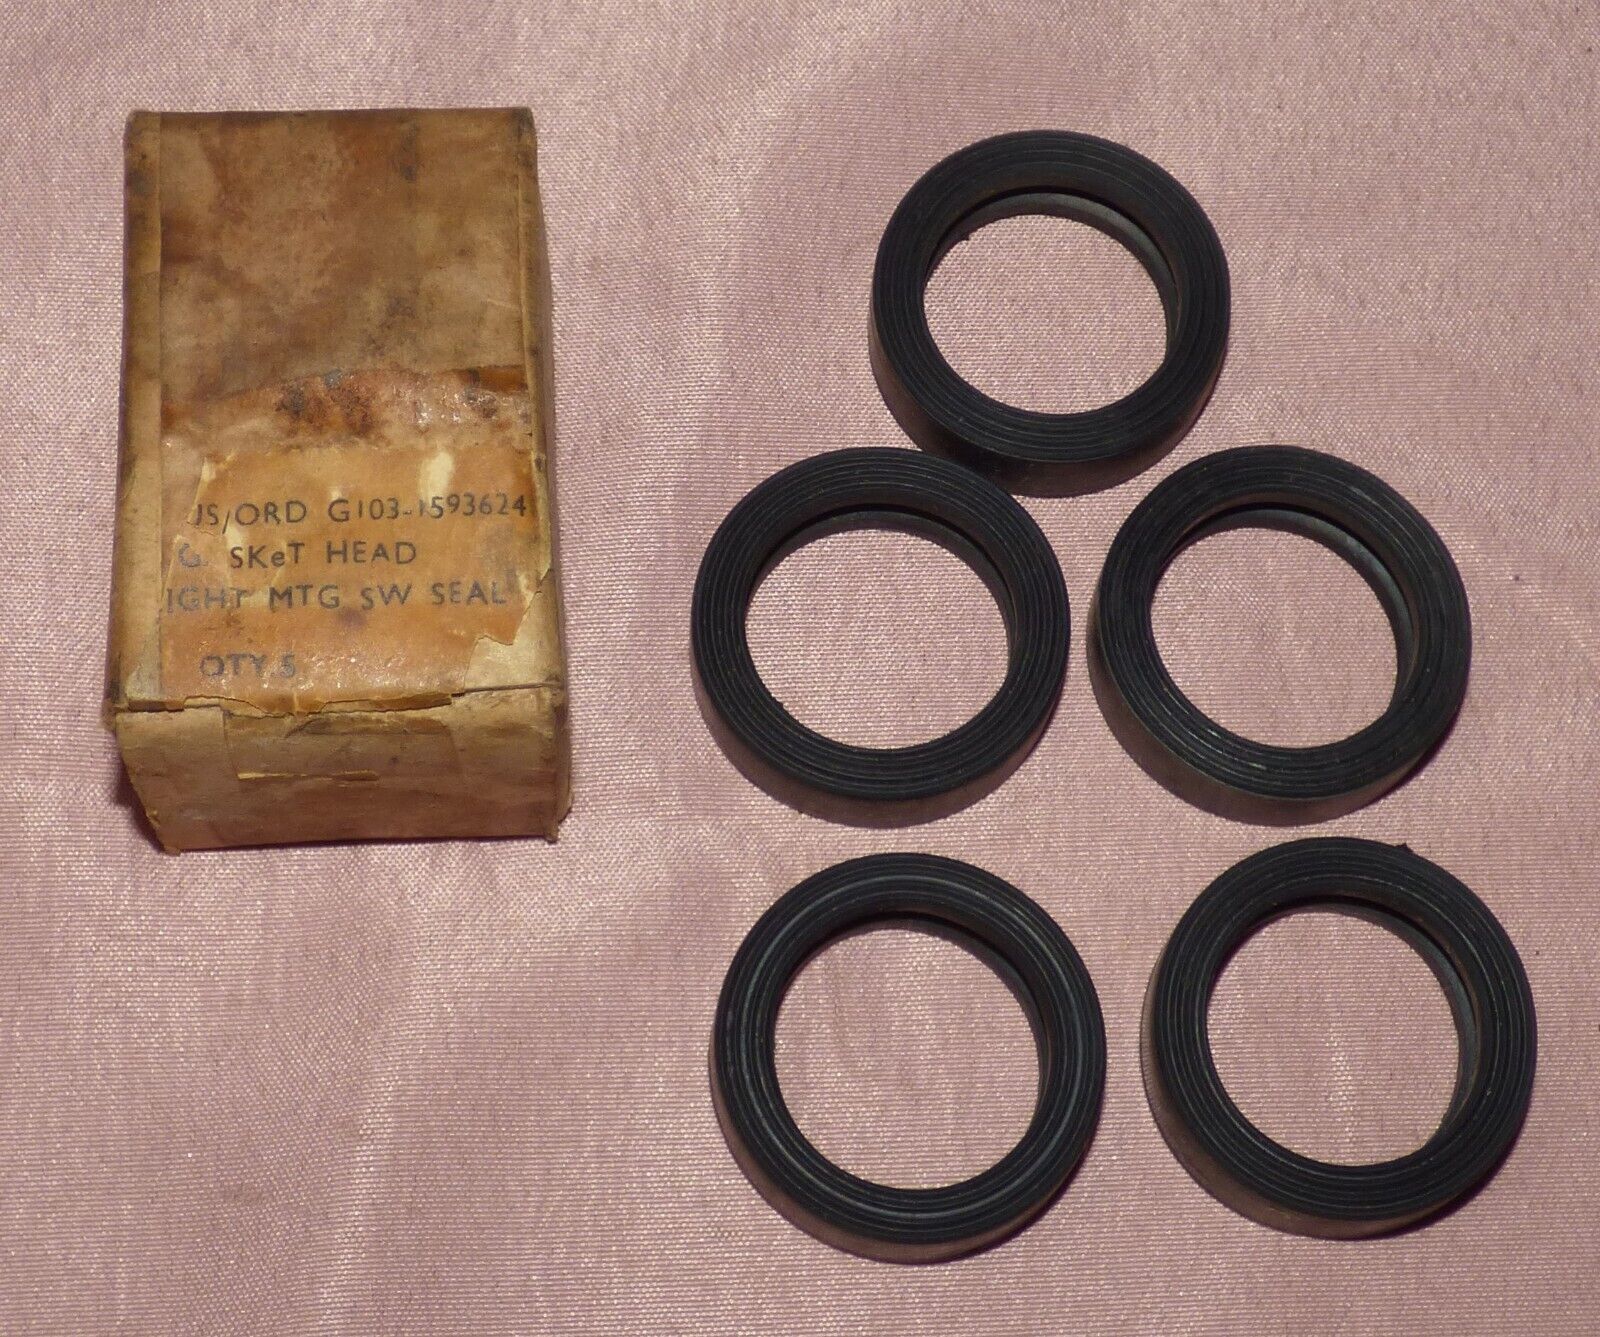 5 PC WWII US Military Vehicle Headlight Rubber Gasket Head Seal ORD G103-1593624